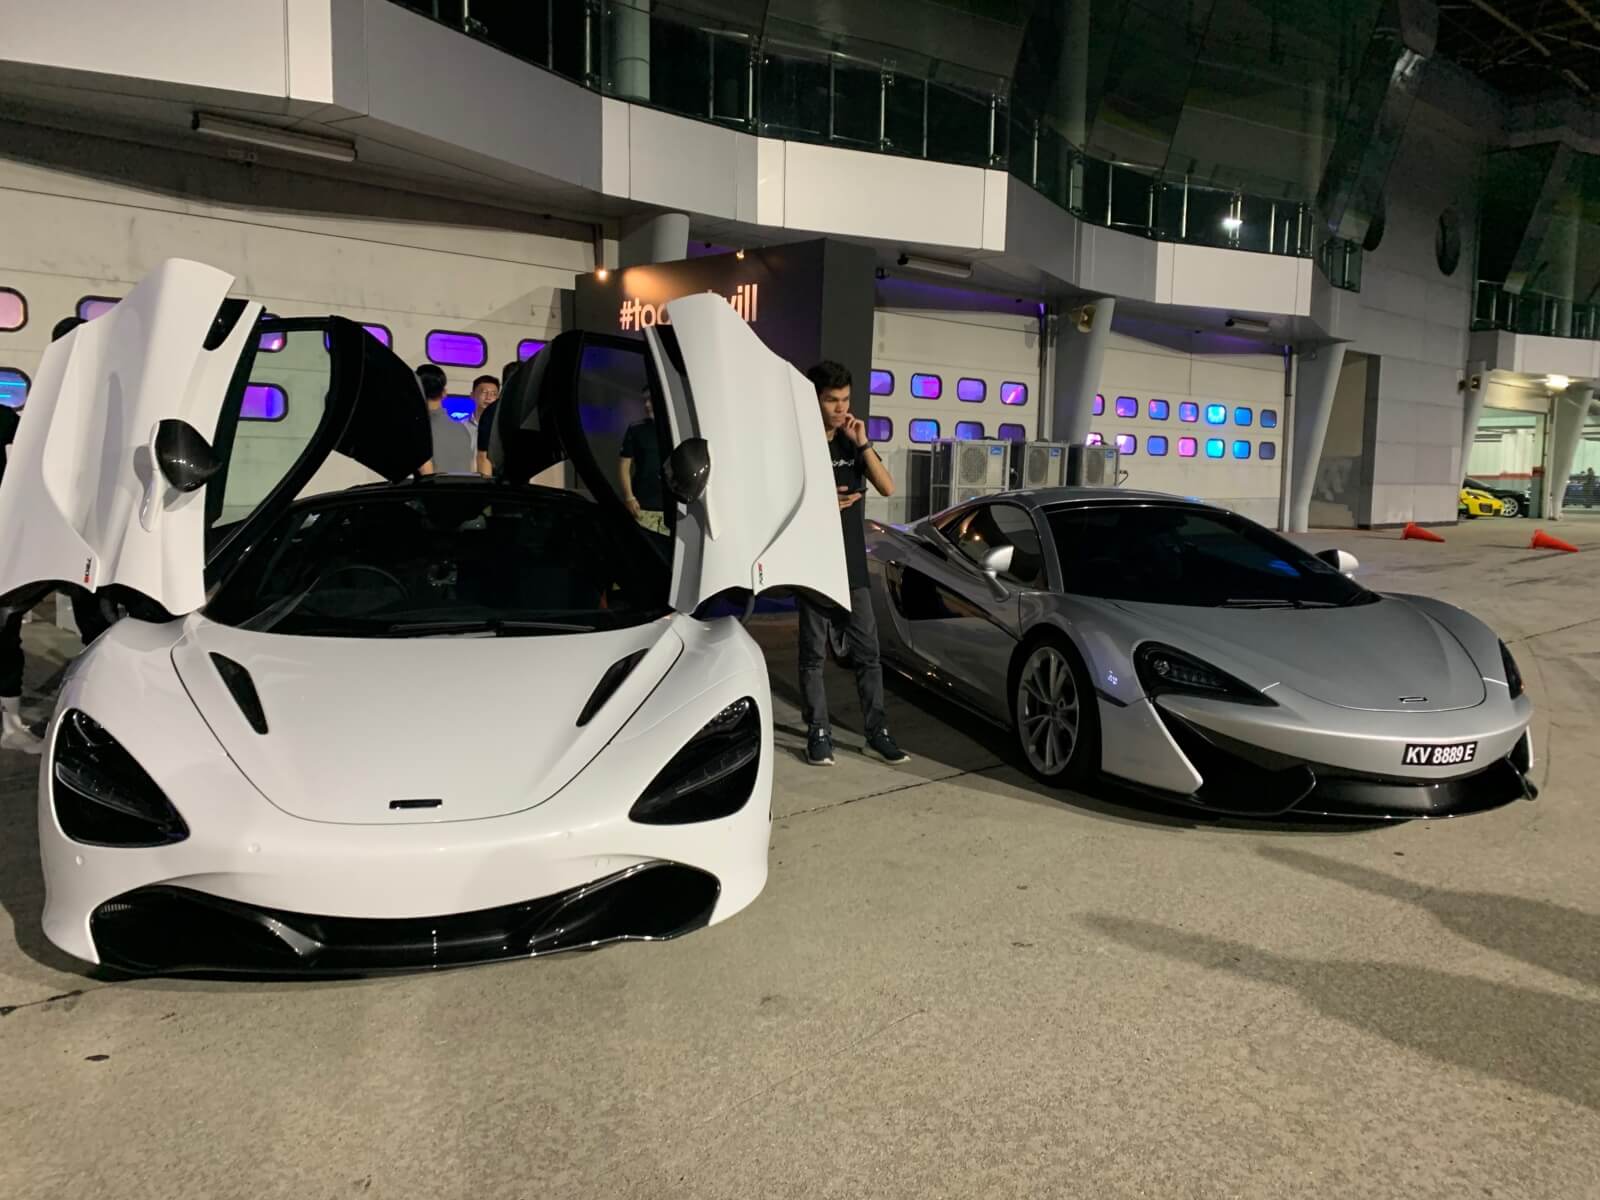 Hot Air Balloon Lifts, McLaren Car Rides and More: Glo Malaysia Threw The Sickest Party This 2019 - WORLD OF BUZZ 13